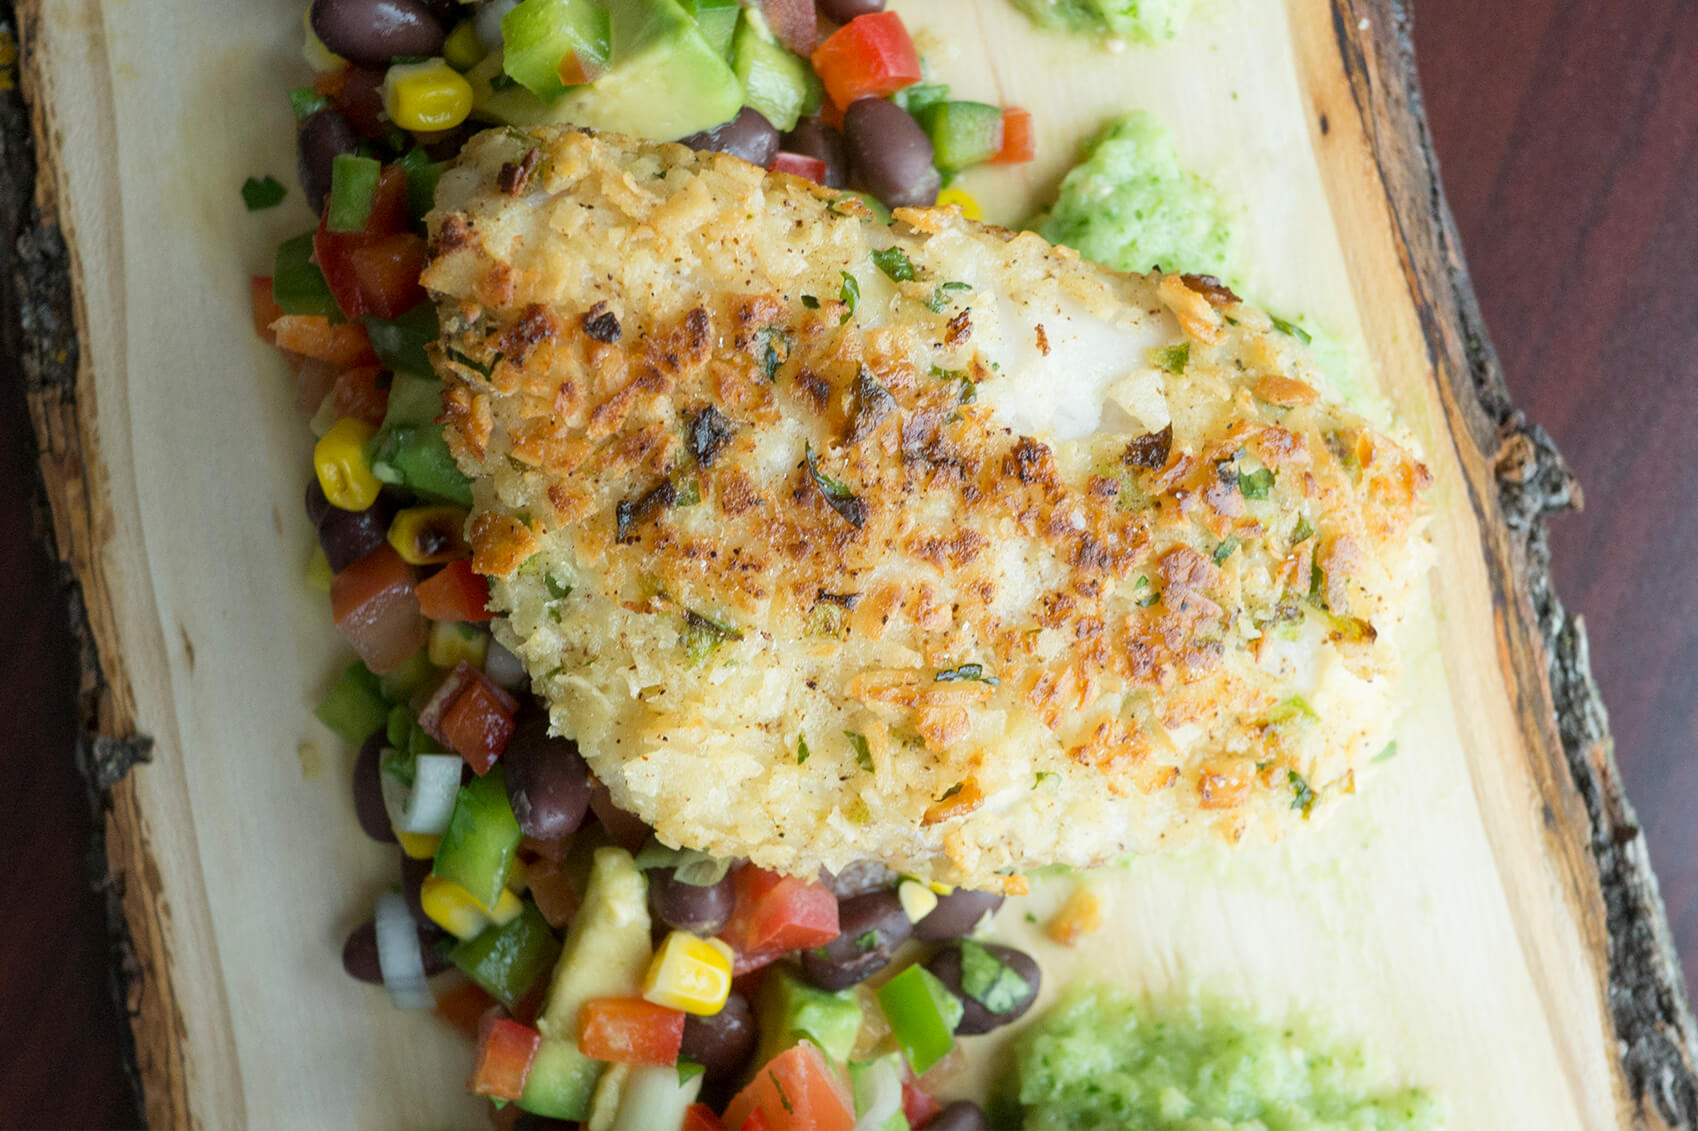 Pair your tortilla crusted tilapia with a black bean and corn salsa and tomatillo sauce.